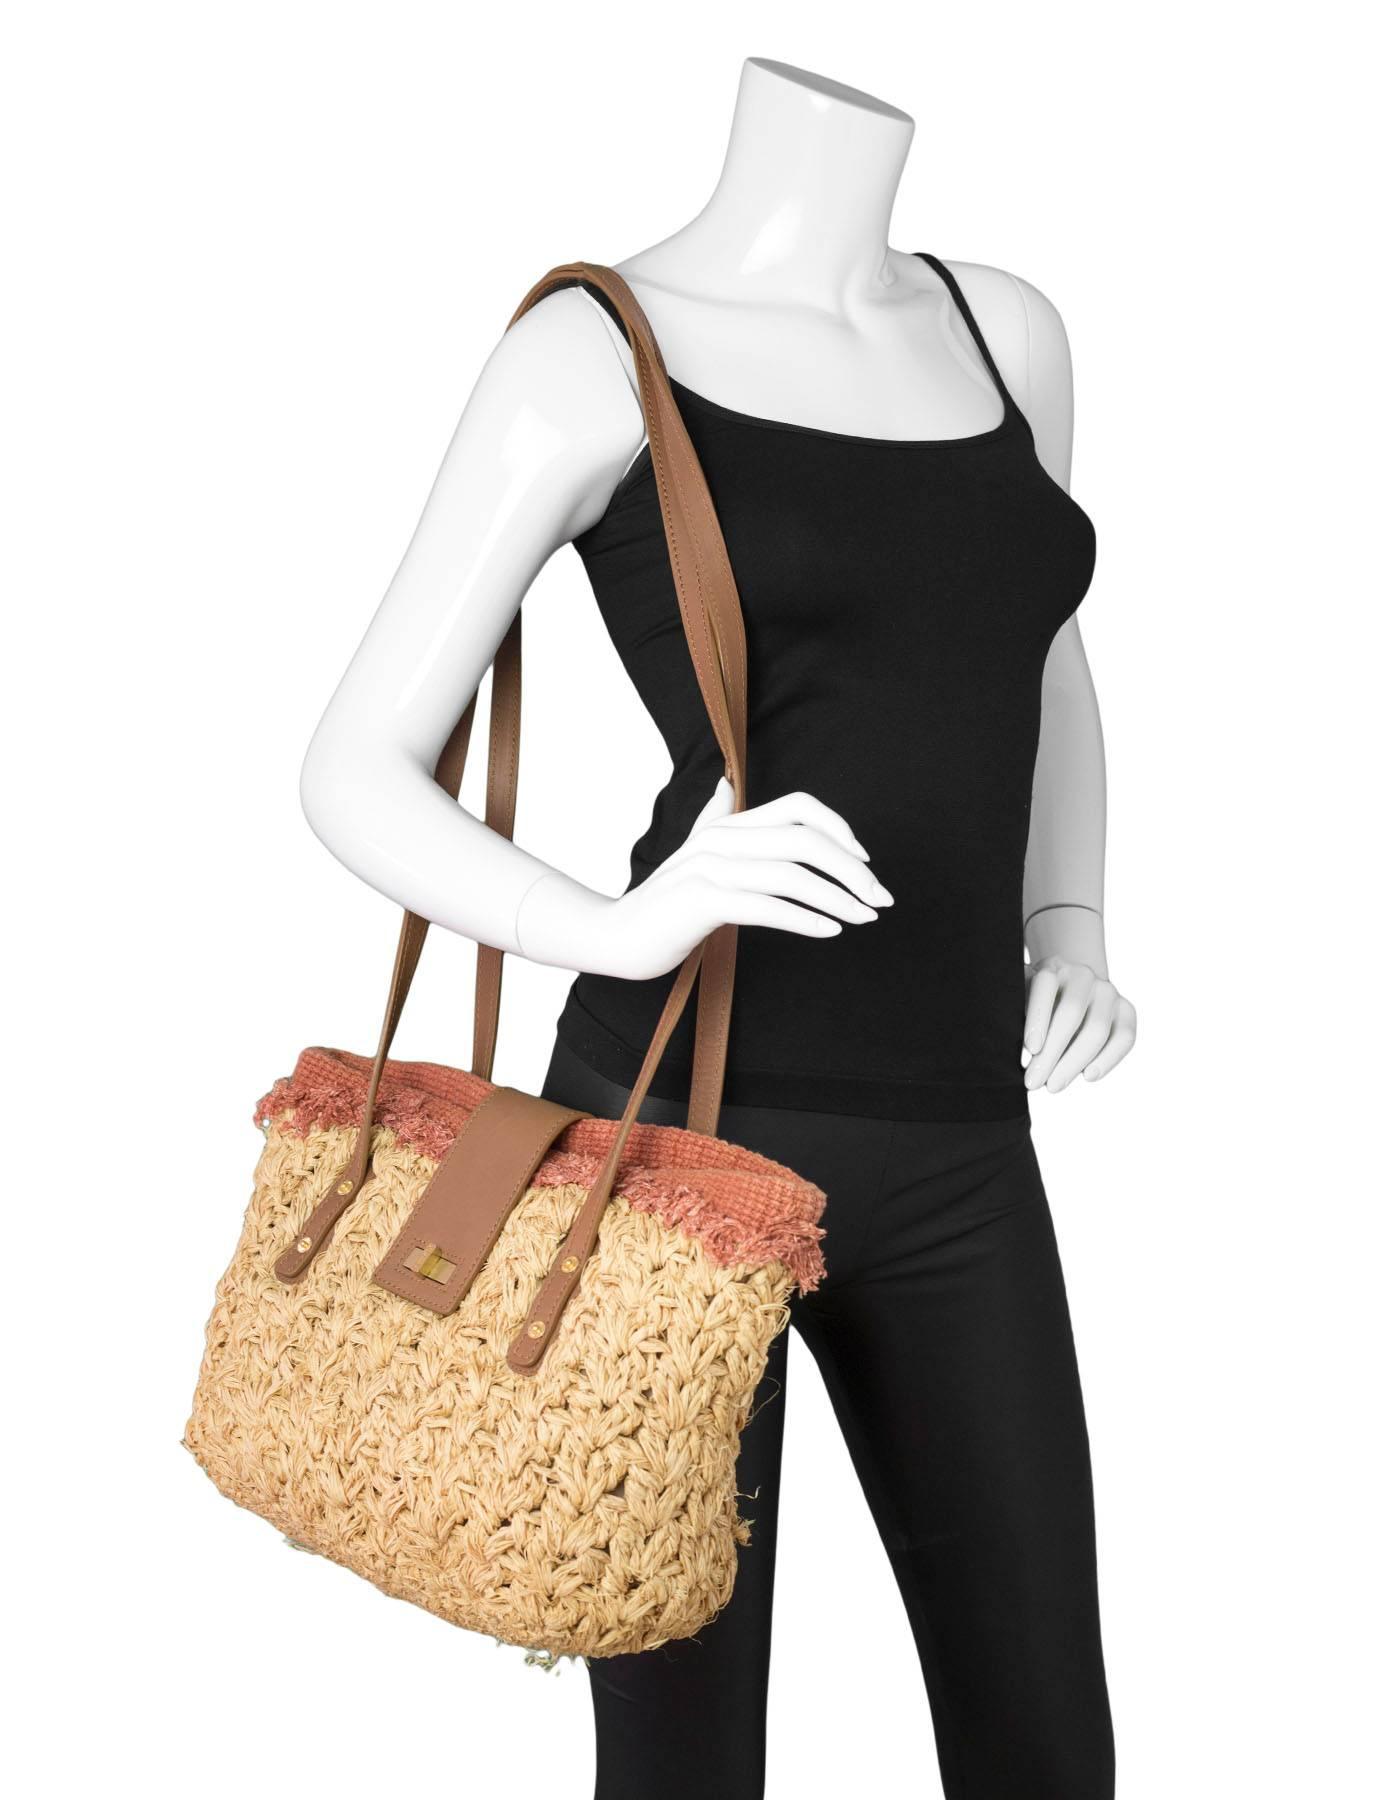 Chanel Braided Raffia Straw Tote

Made In: Italy
Year of Production: 2011
Color: Tan, brown
Hardware: Goldtone
Materials: Straw, leather
Lining: Brown textile
Closure/opening: Center flap with twist lock
Exterior Pockets: None
Interior Pockets: One